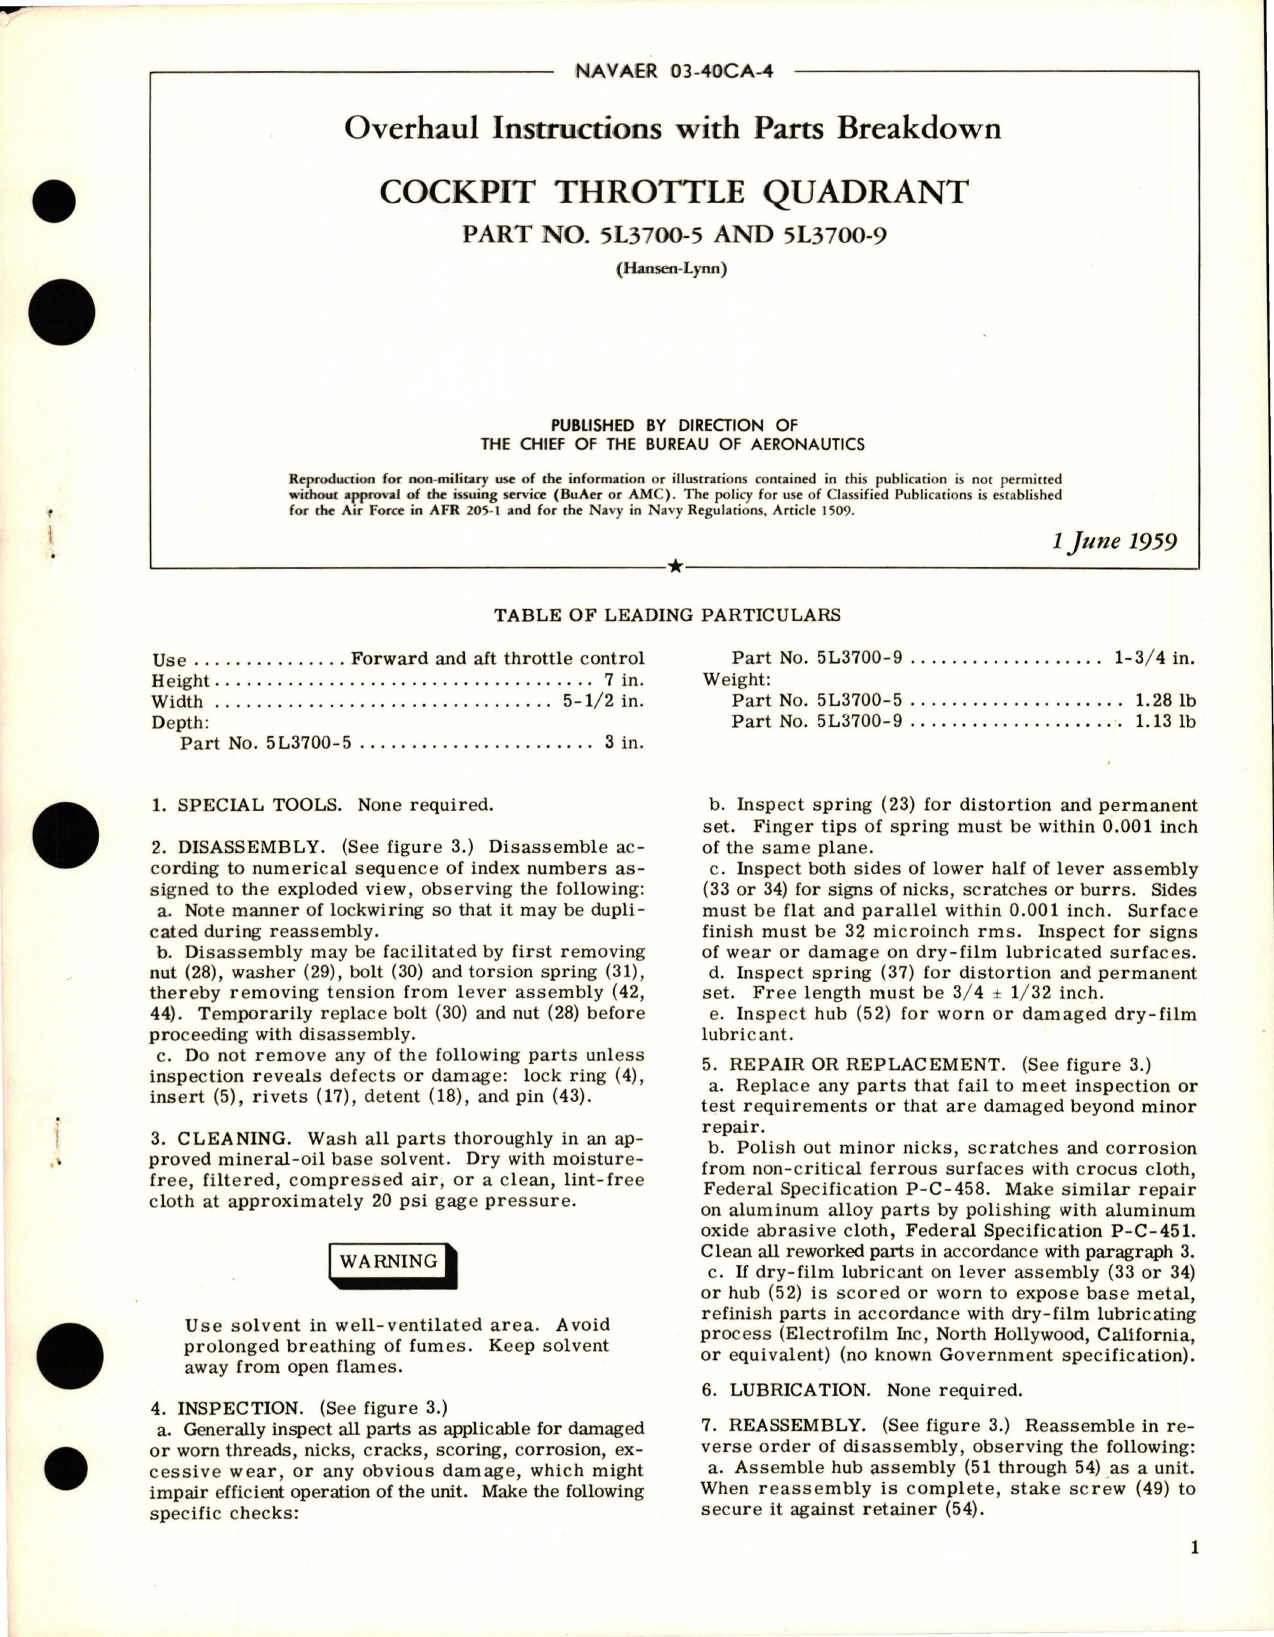 Sample page 1 from AirCorps Library document:  Overhaul Instructions with Parts Breakdown for Cockpit Throttle Quadrant - Parts 5L3700-5 and 5L3700-9 